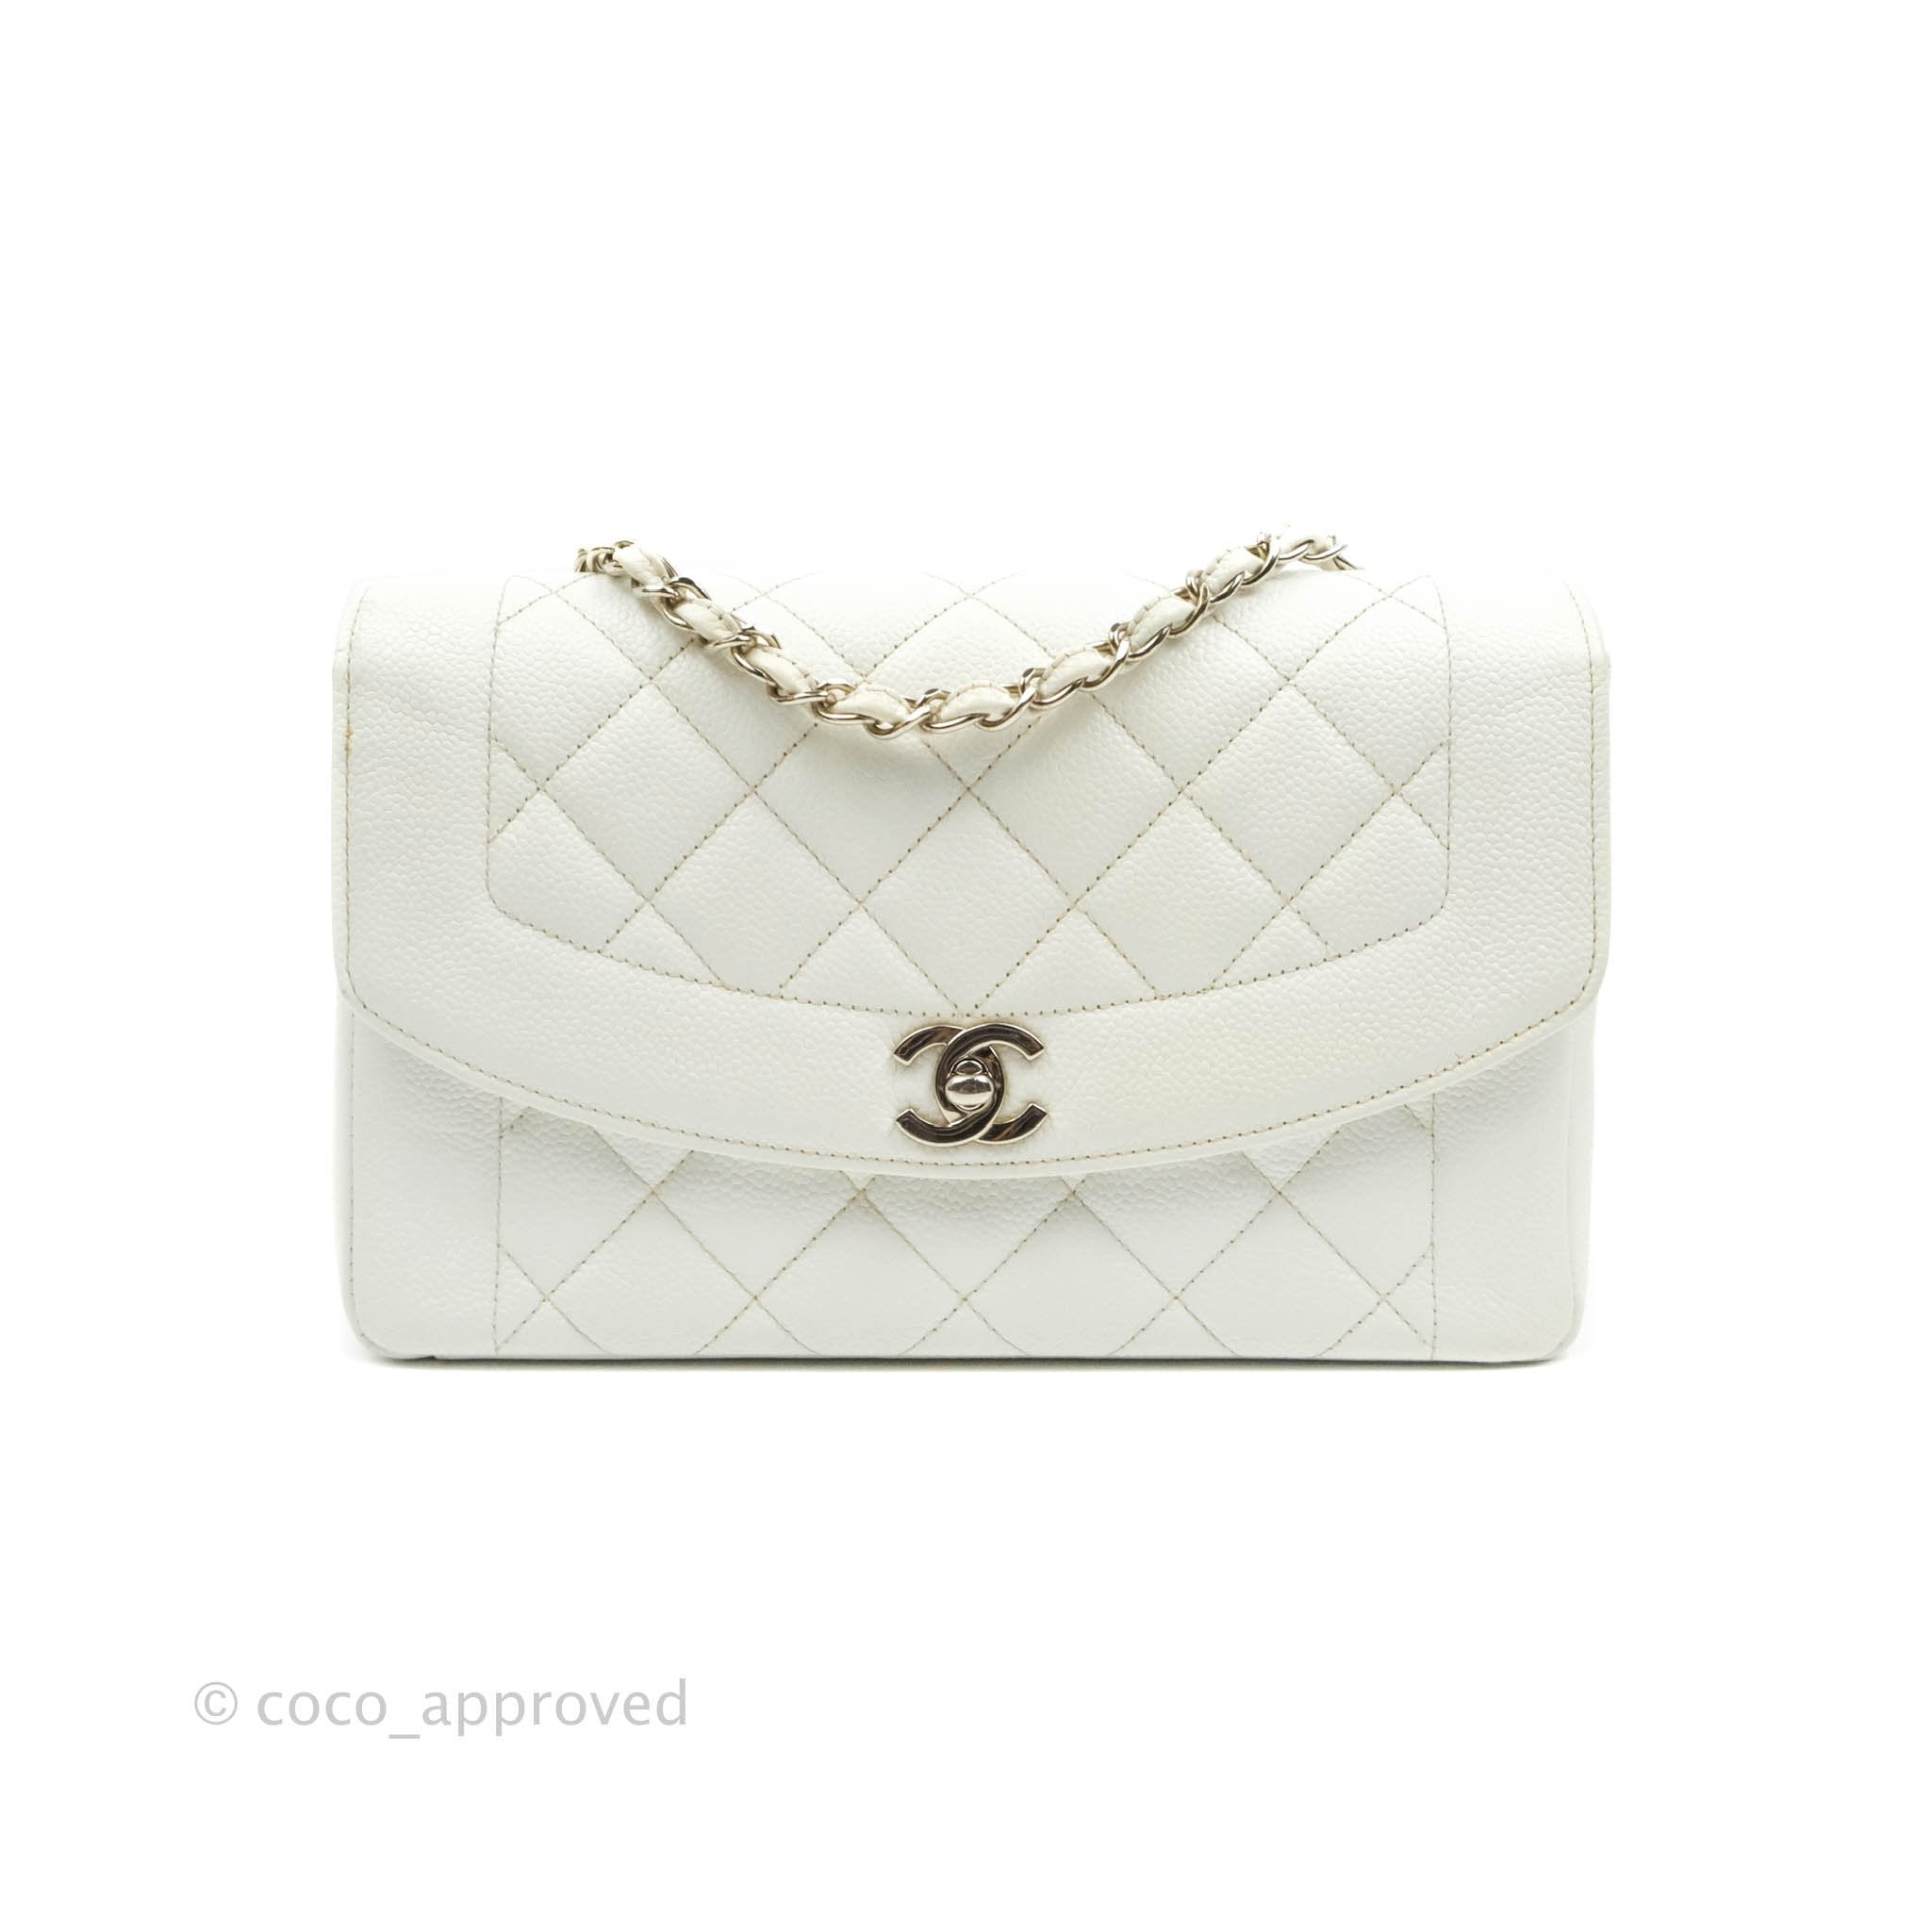 Chanel Vintage Medium Classic Quilted Diana Flap Bag White Caviar